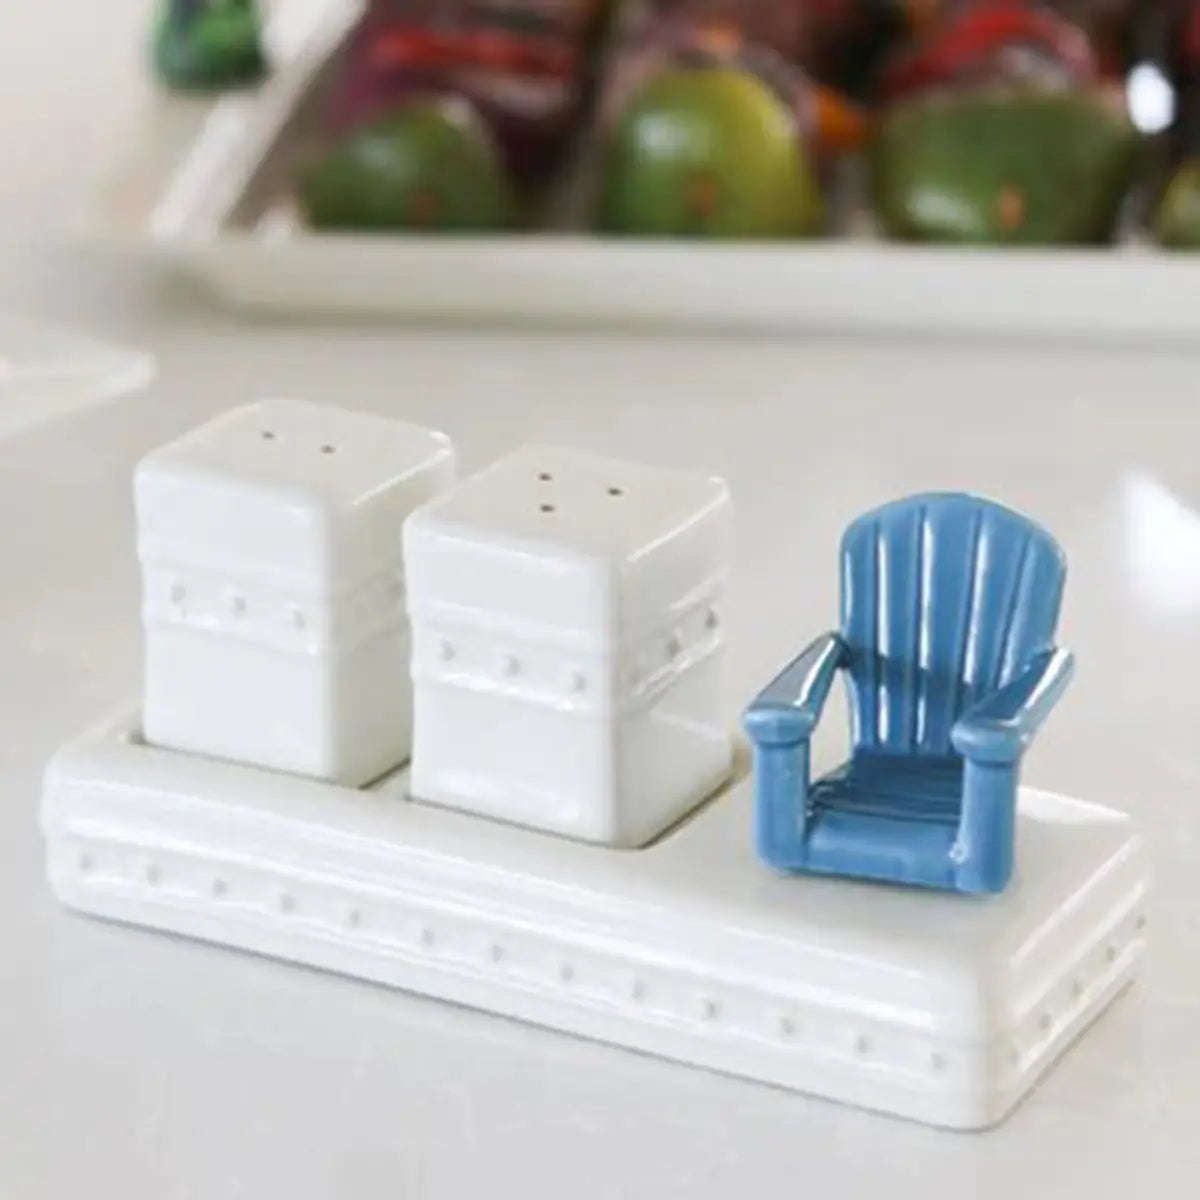 Nora Fleming Chillin Chair Adirondack Chair Mini on a salt and pepper shaker in a room with food